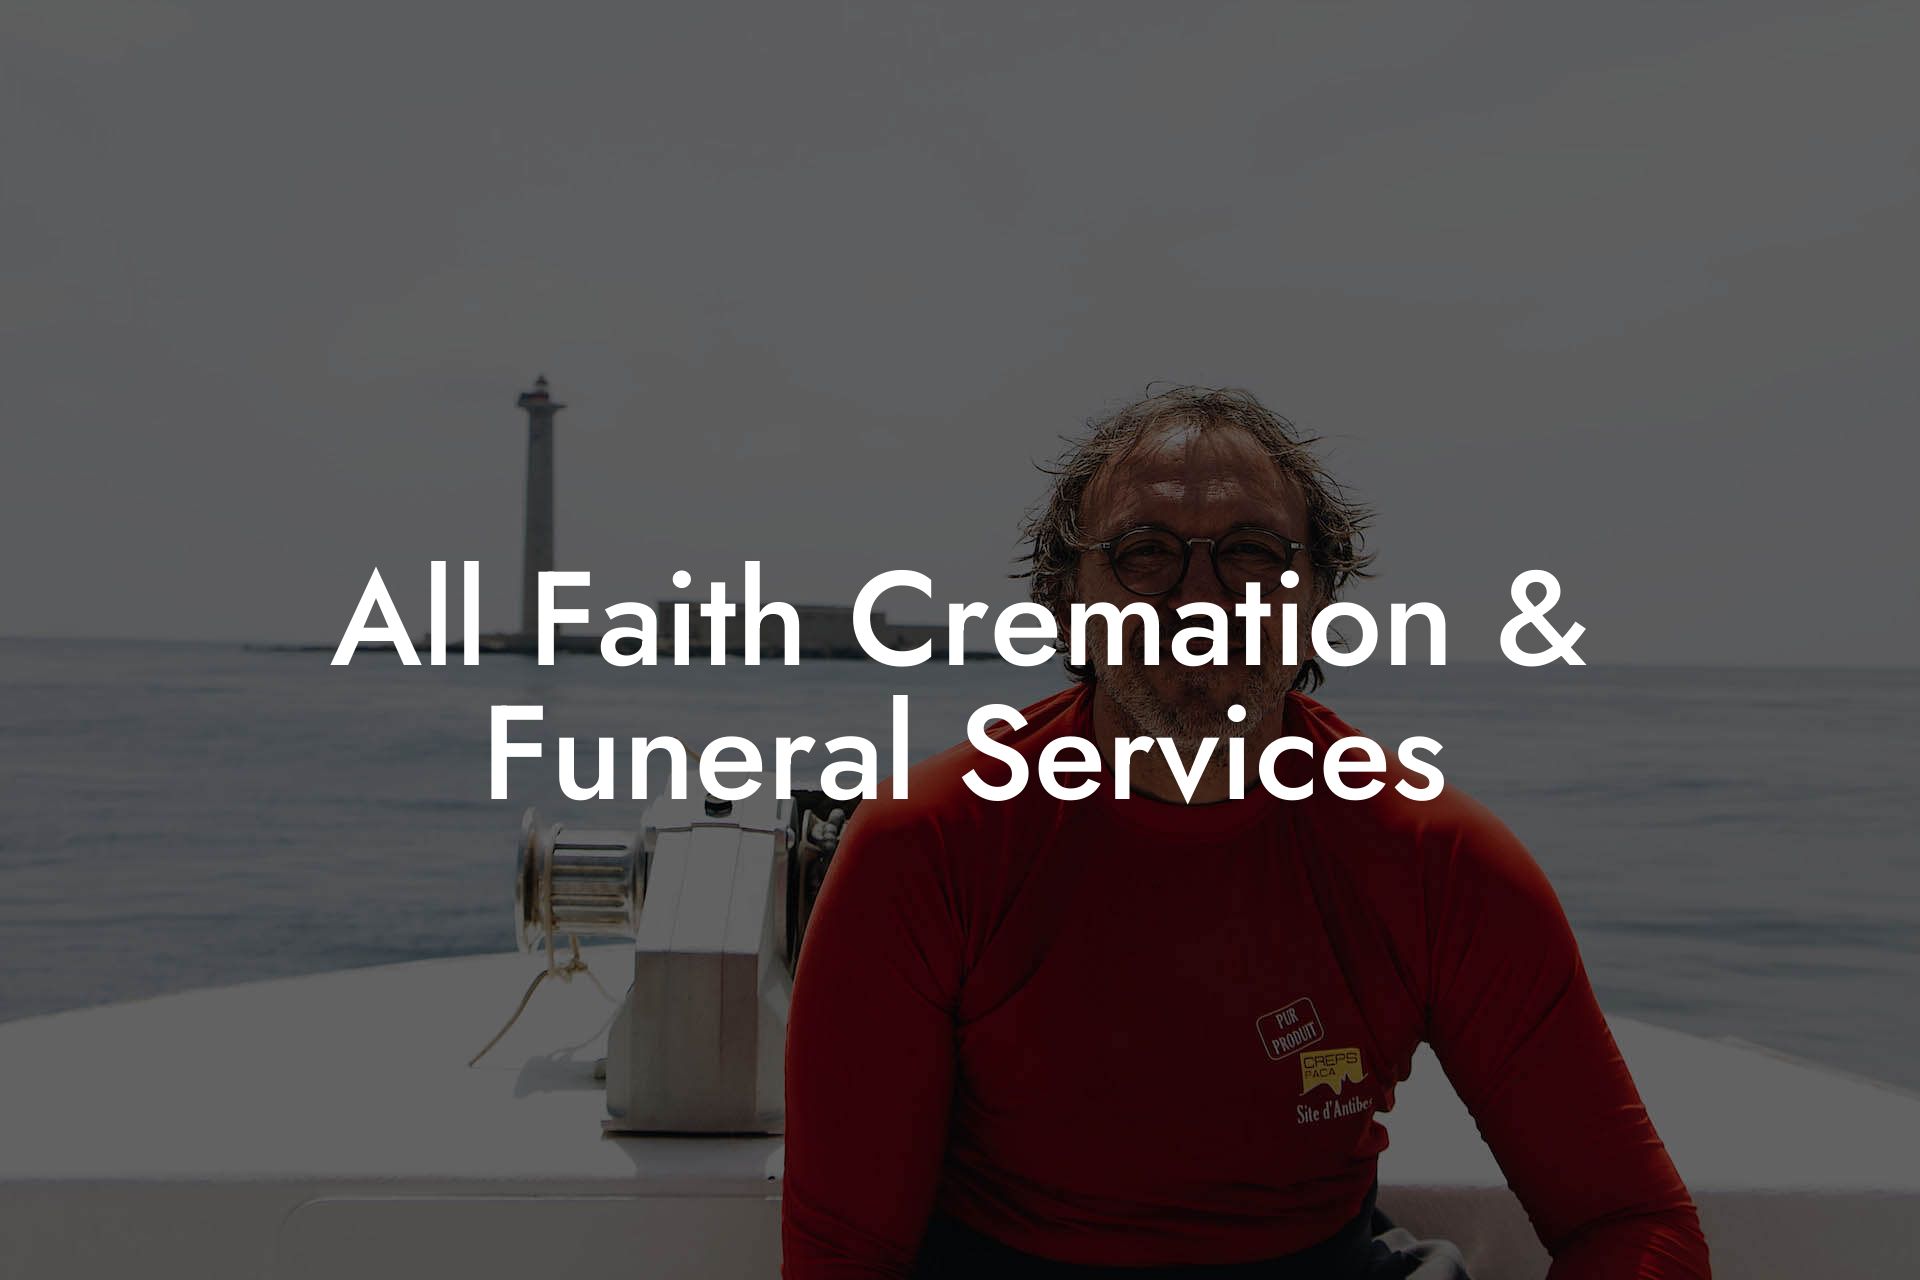 All Faith Cremation & Funeral Services